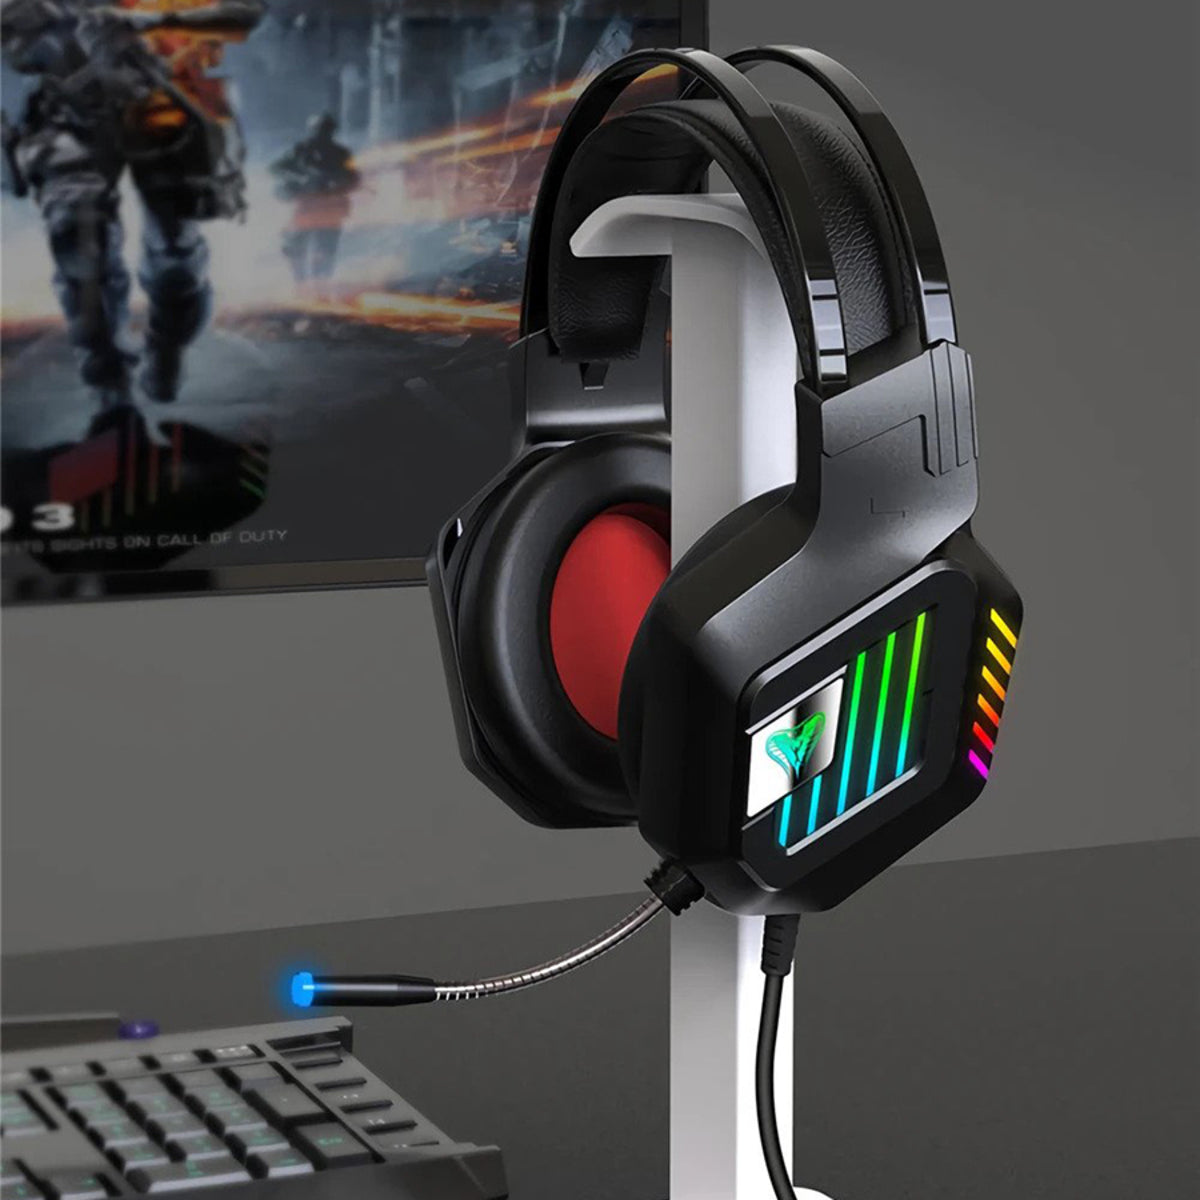 RGB Light Gaming Headset PS4 Headset, Xbox One Headset with Noise Canceling Mic PC Headset with Stereo Surround Sound